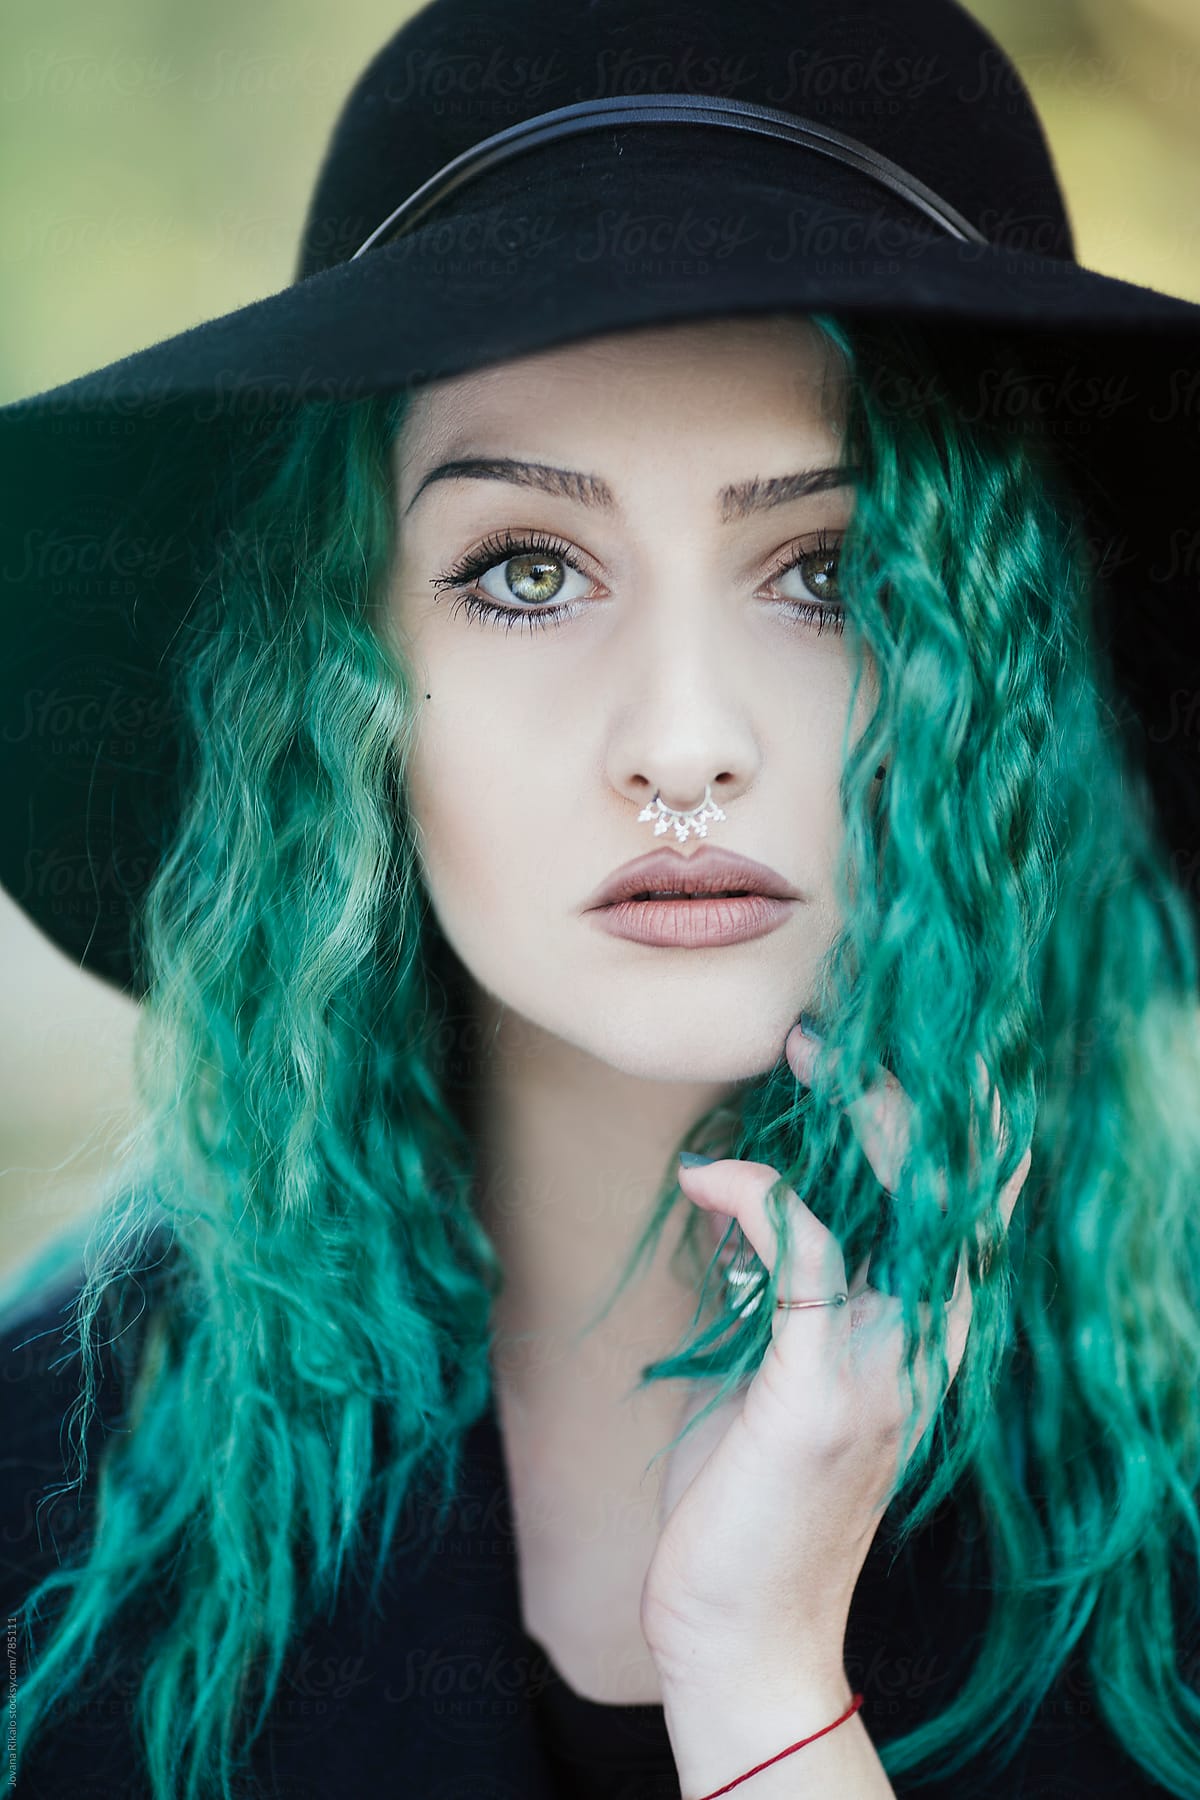 Portrait Of A Beautiful Young Woman With Green Hair And Eyes Del Colaborador De Stocksy 